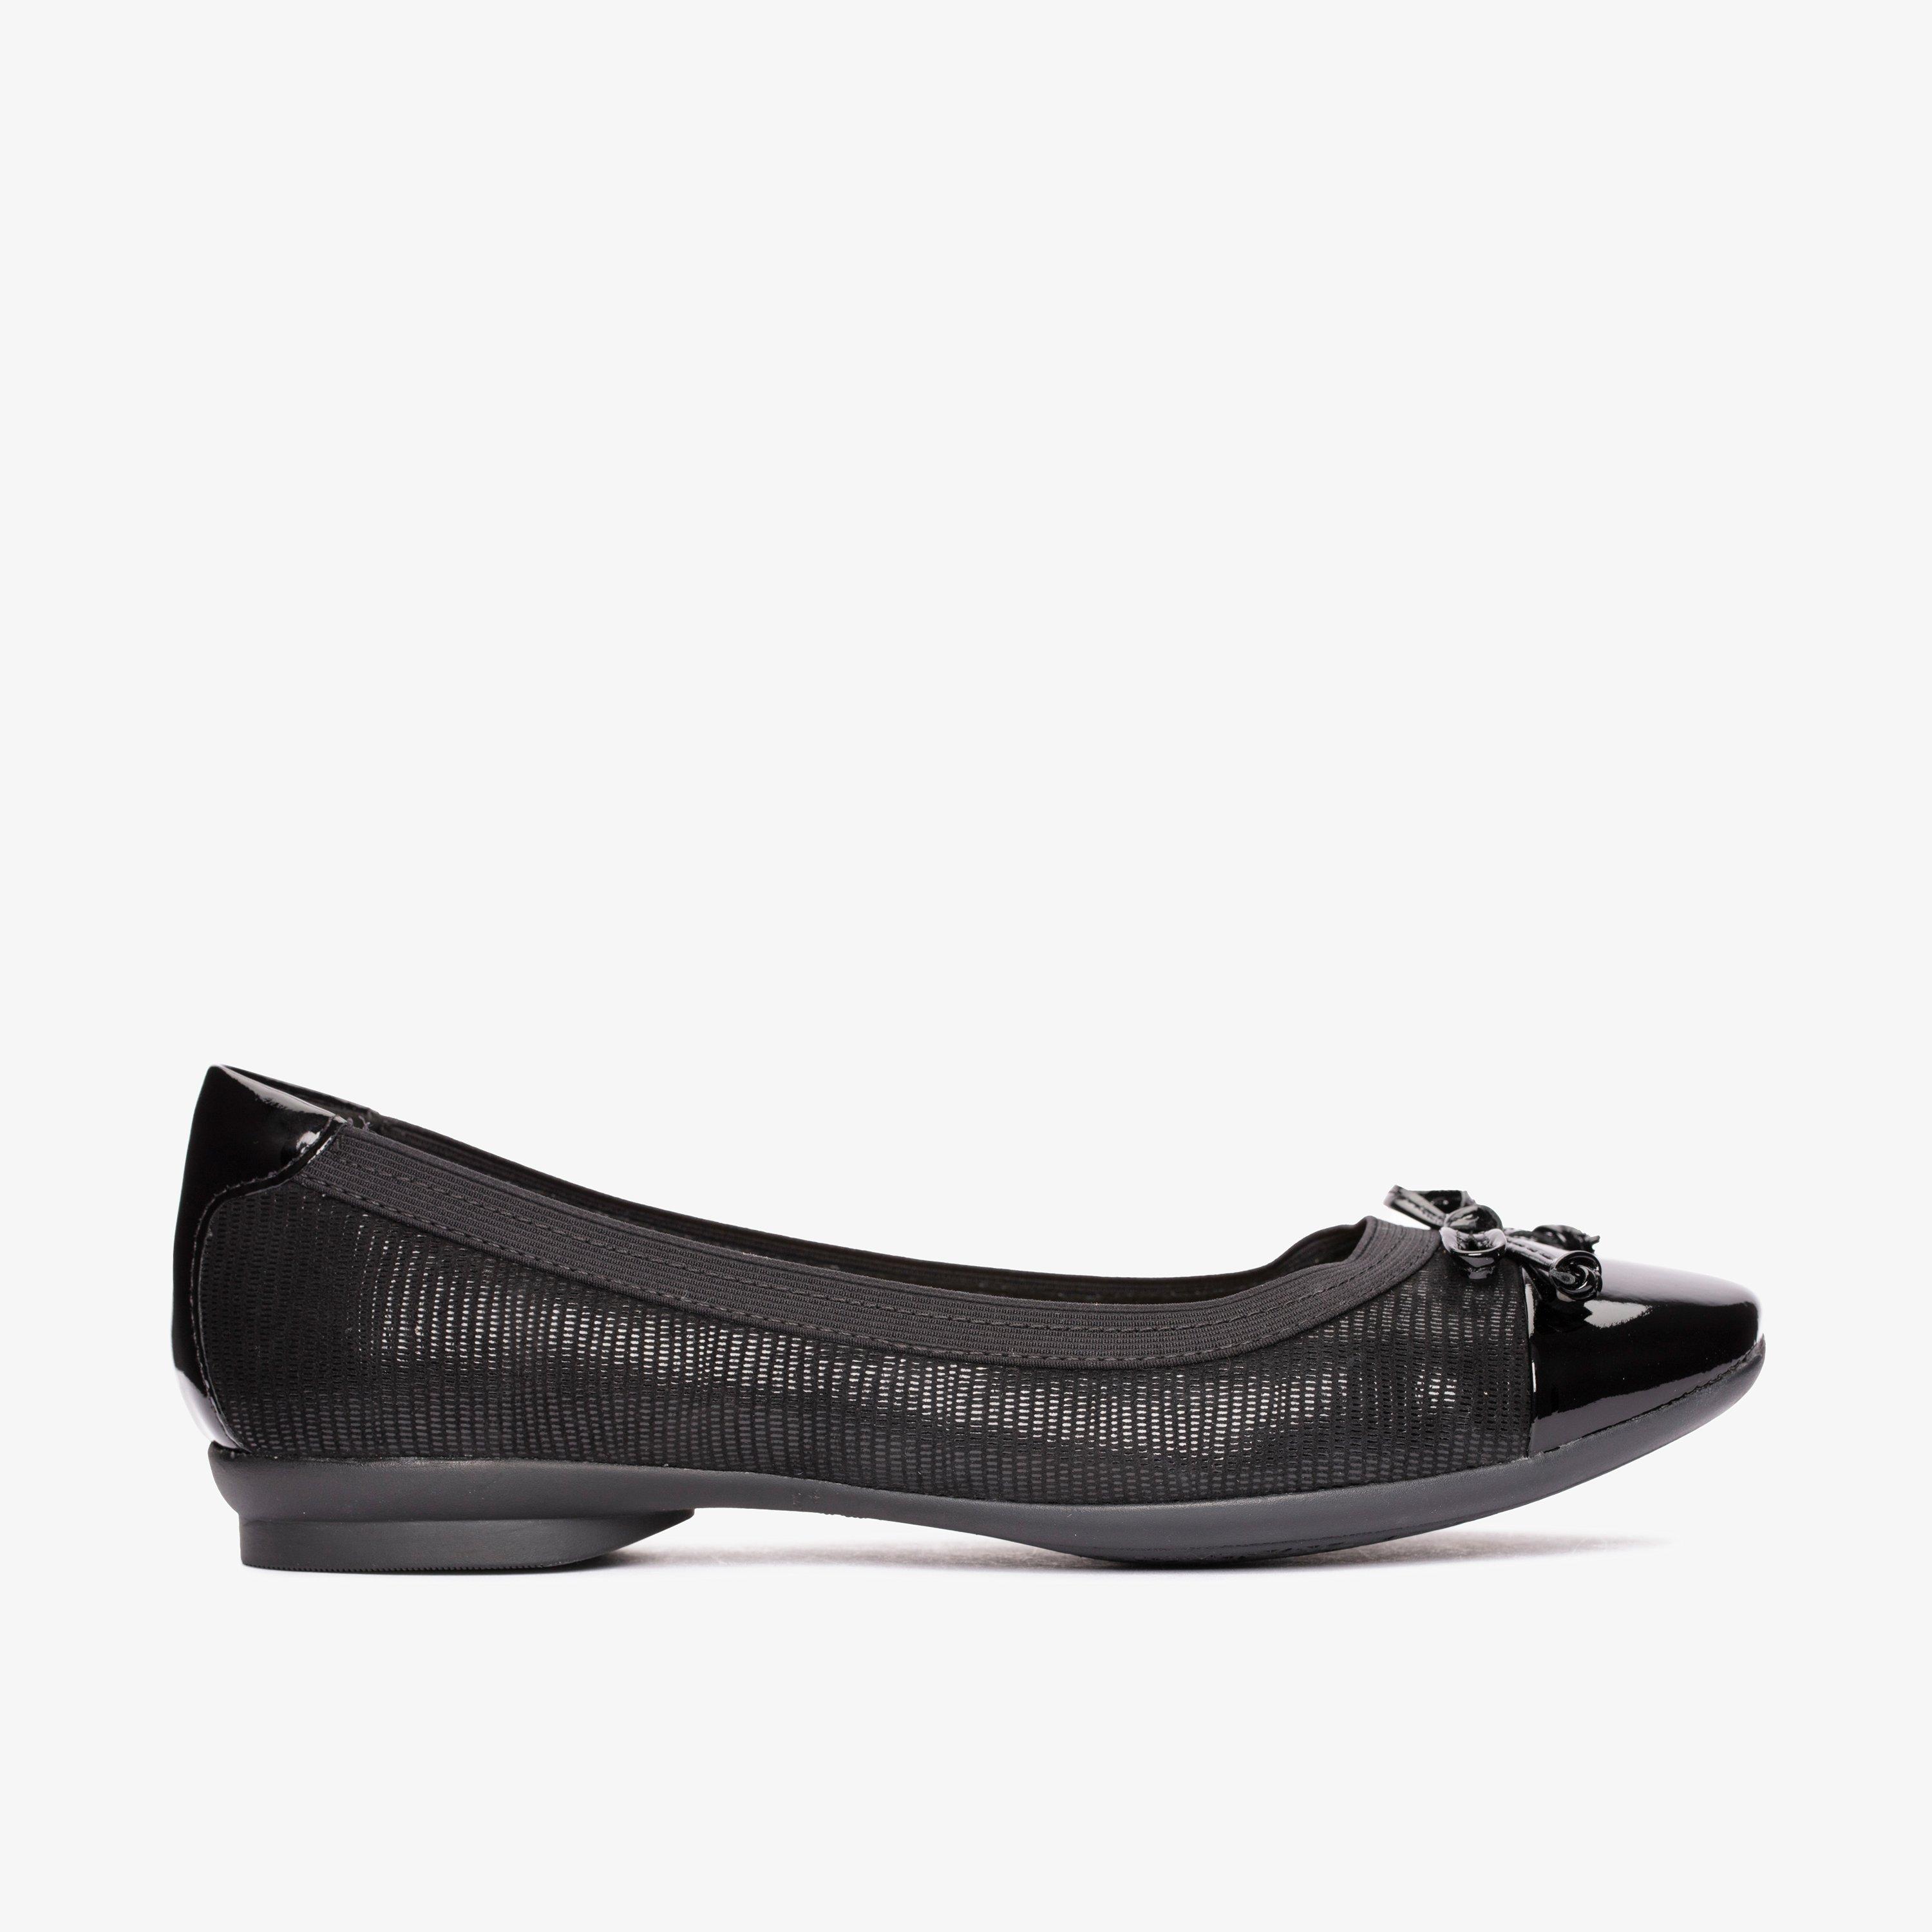 Candra Glow Suede Black Slip On Shoes | Clarks Outlet